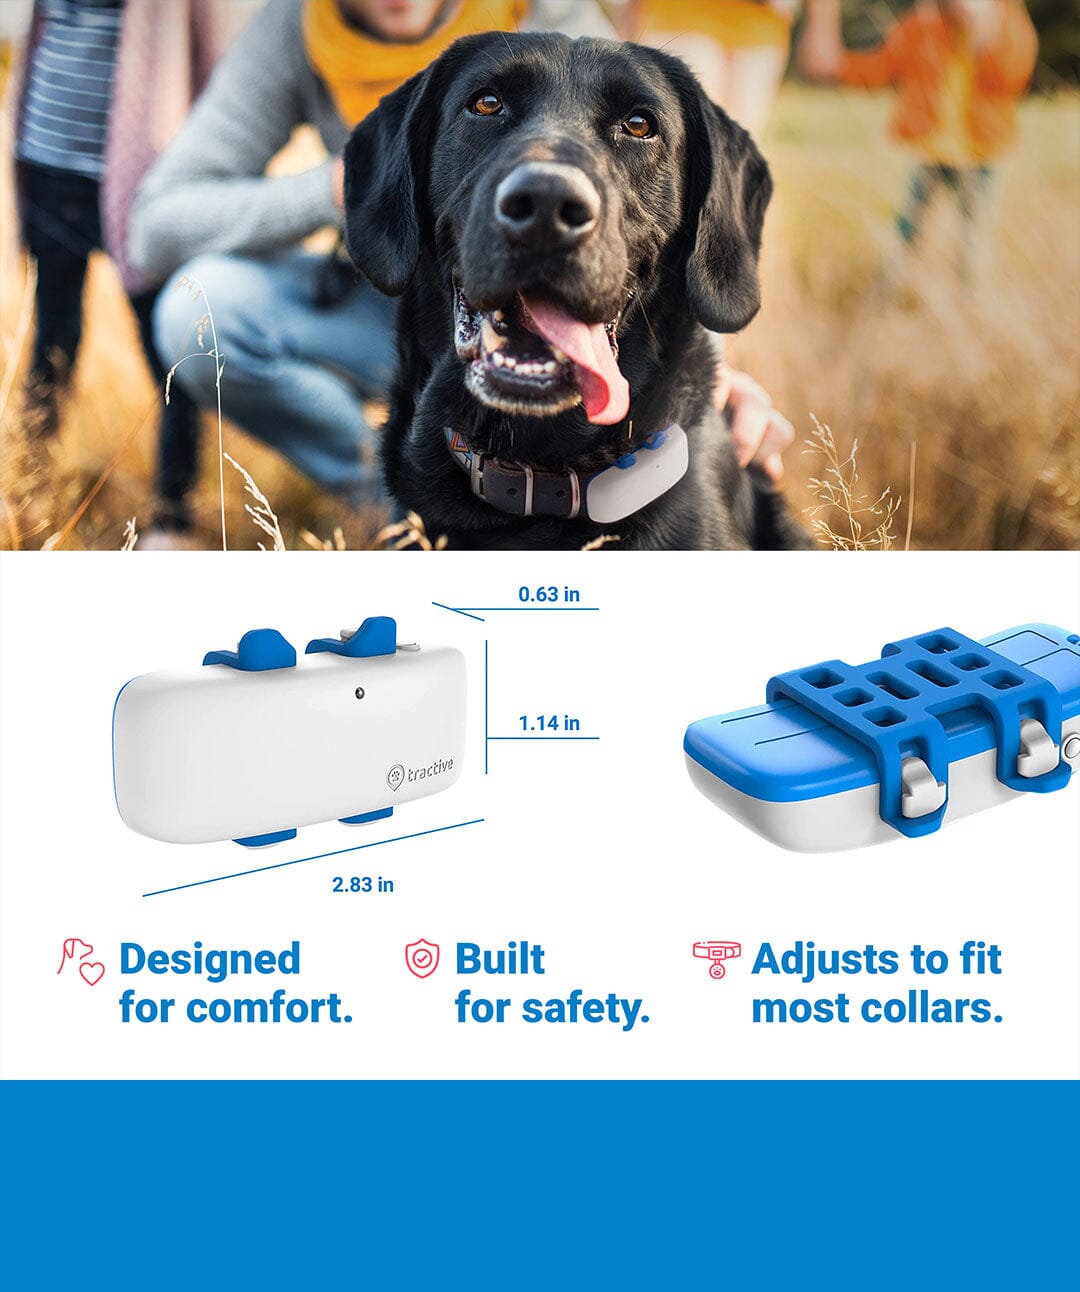 Tractive GPS Pet Tracker for Dogs - Waterproof, GPS Location